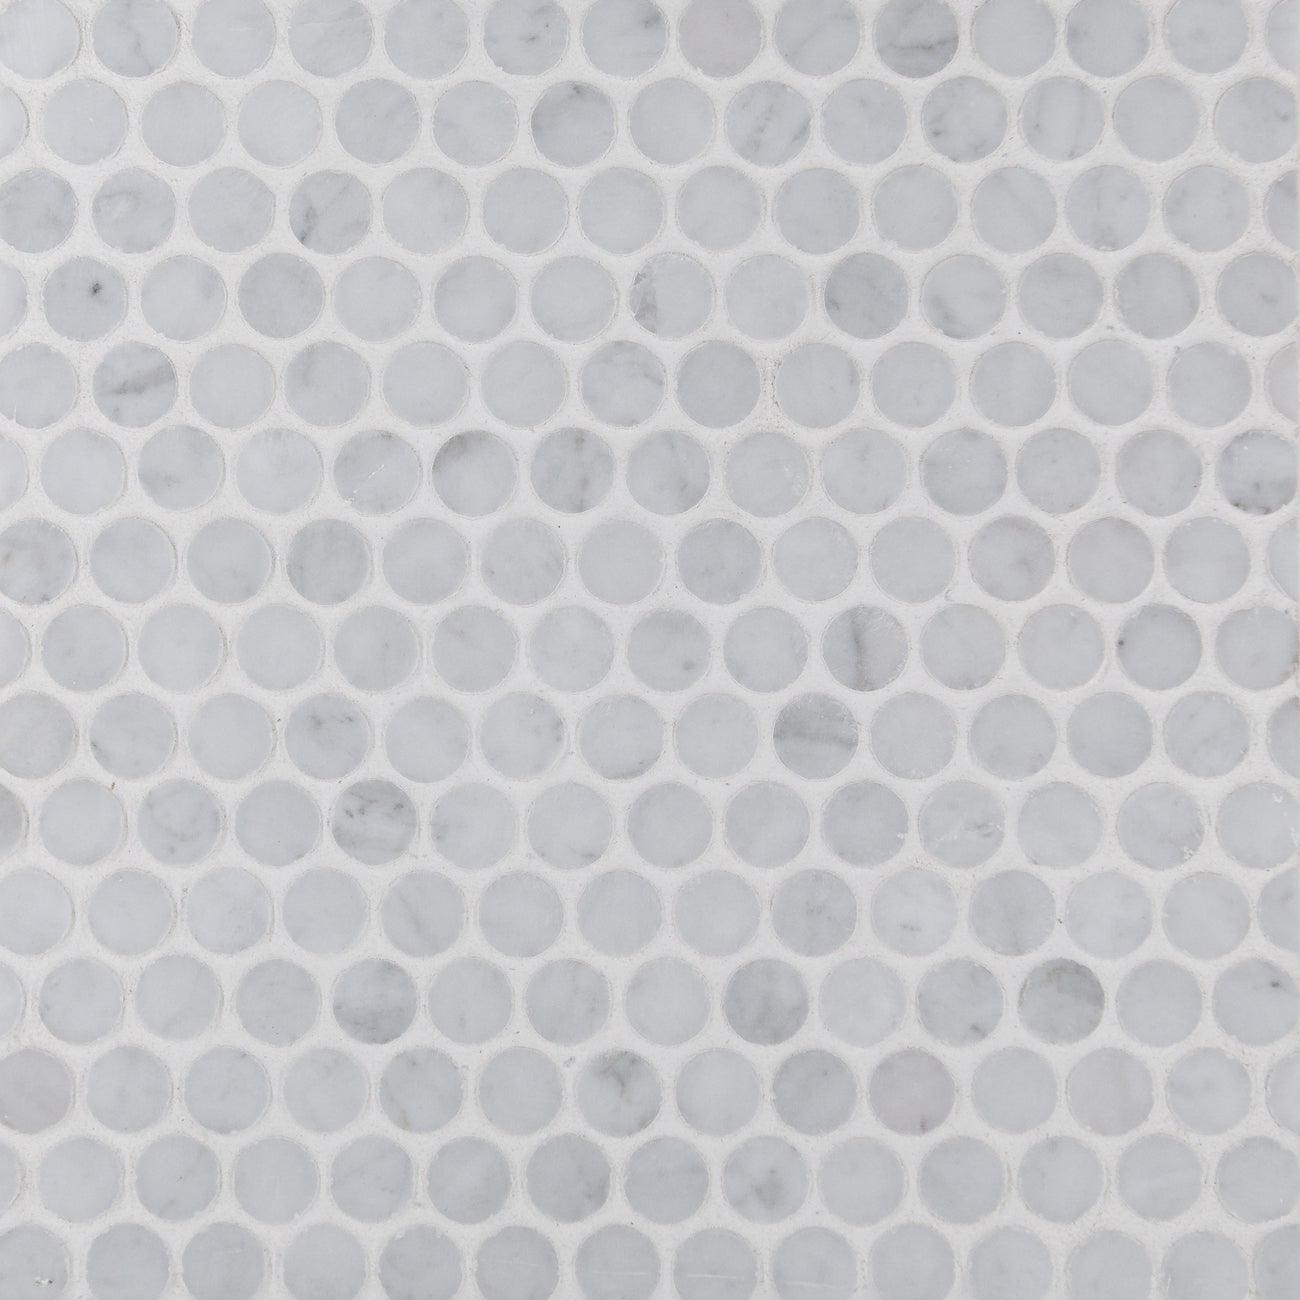 Carrara Bianca marble mosaic with penny-round pattern, 12x12x0.375 inches